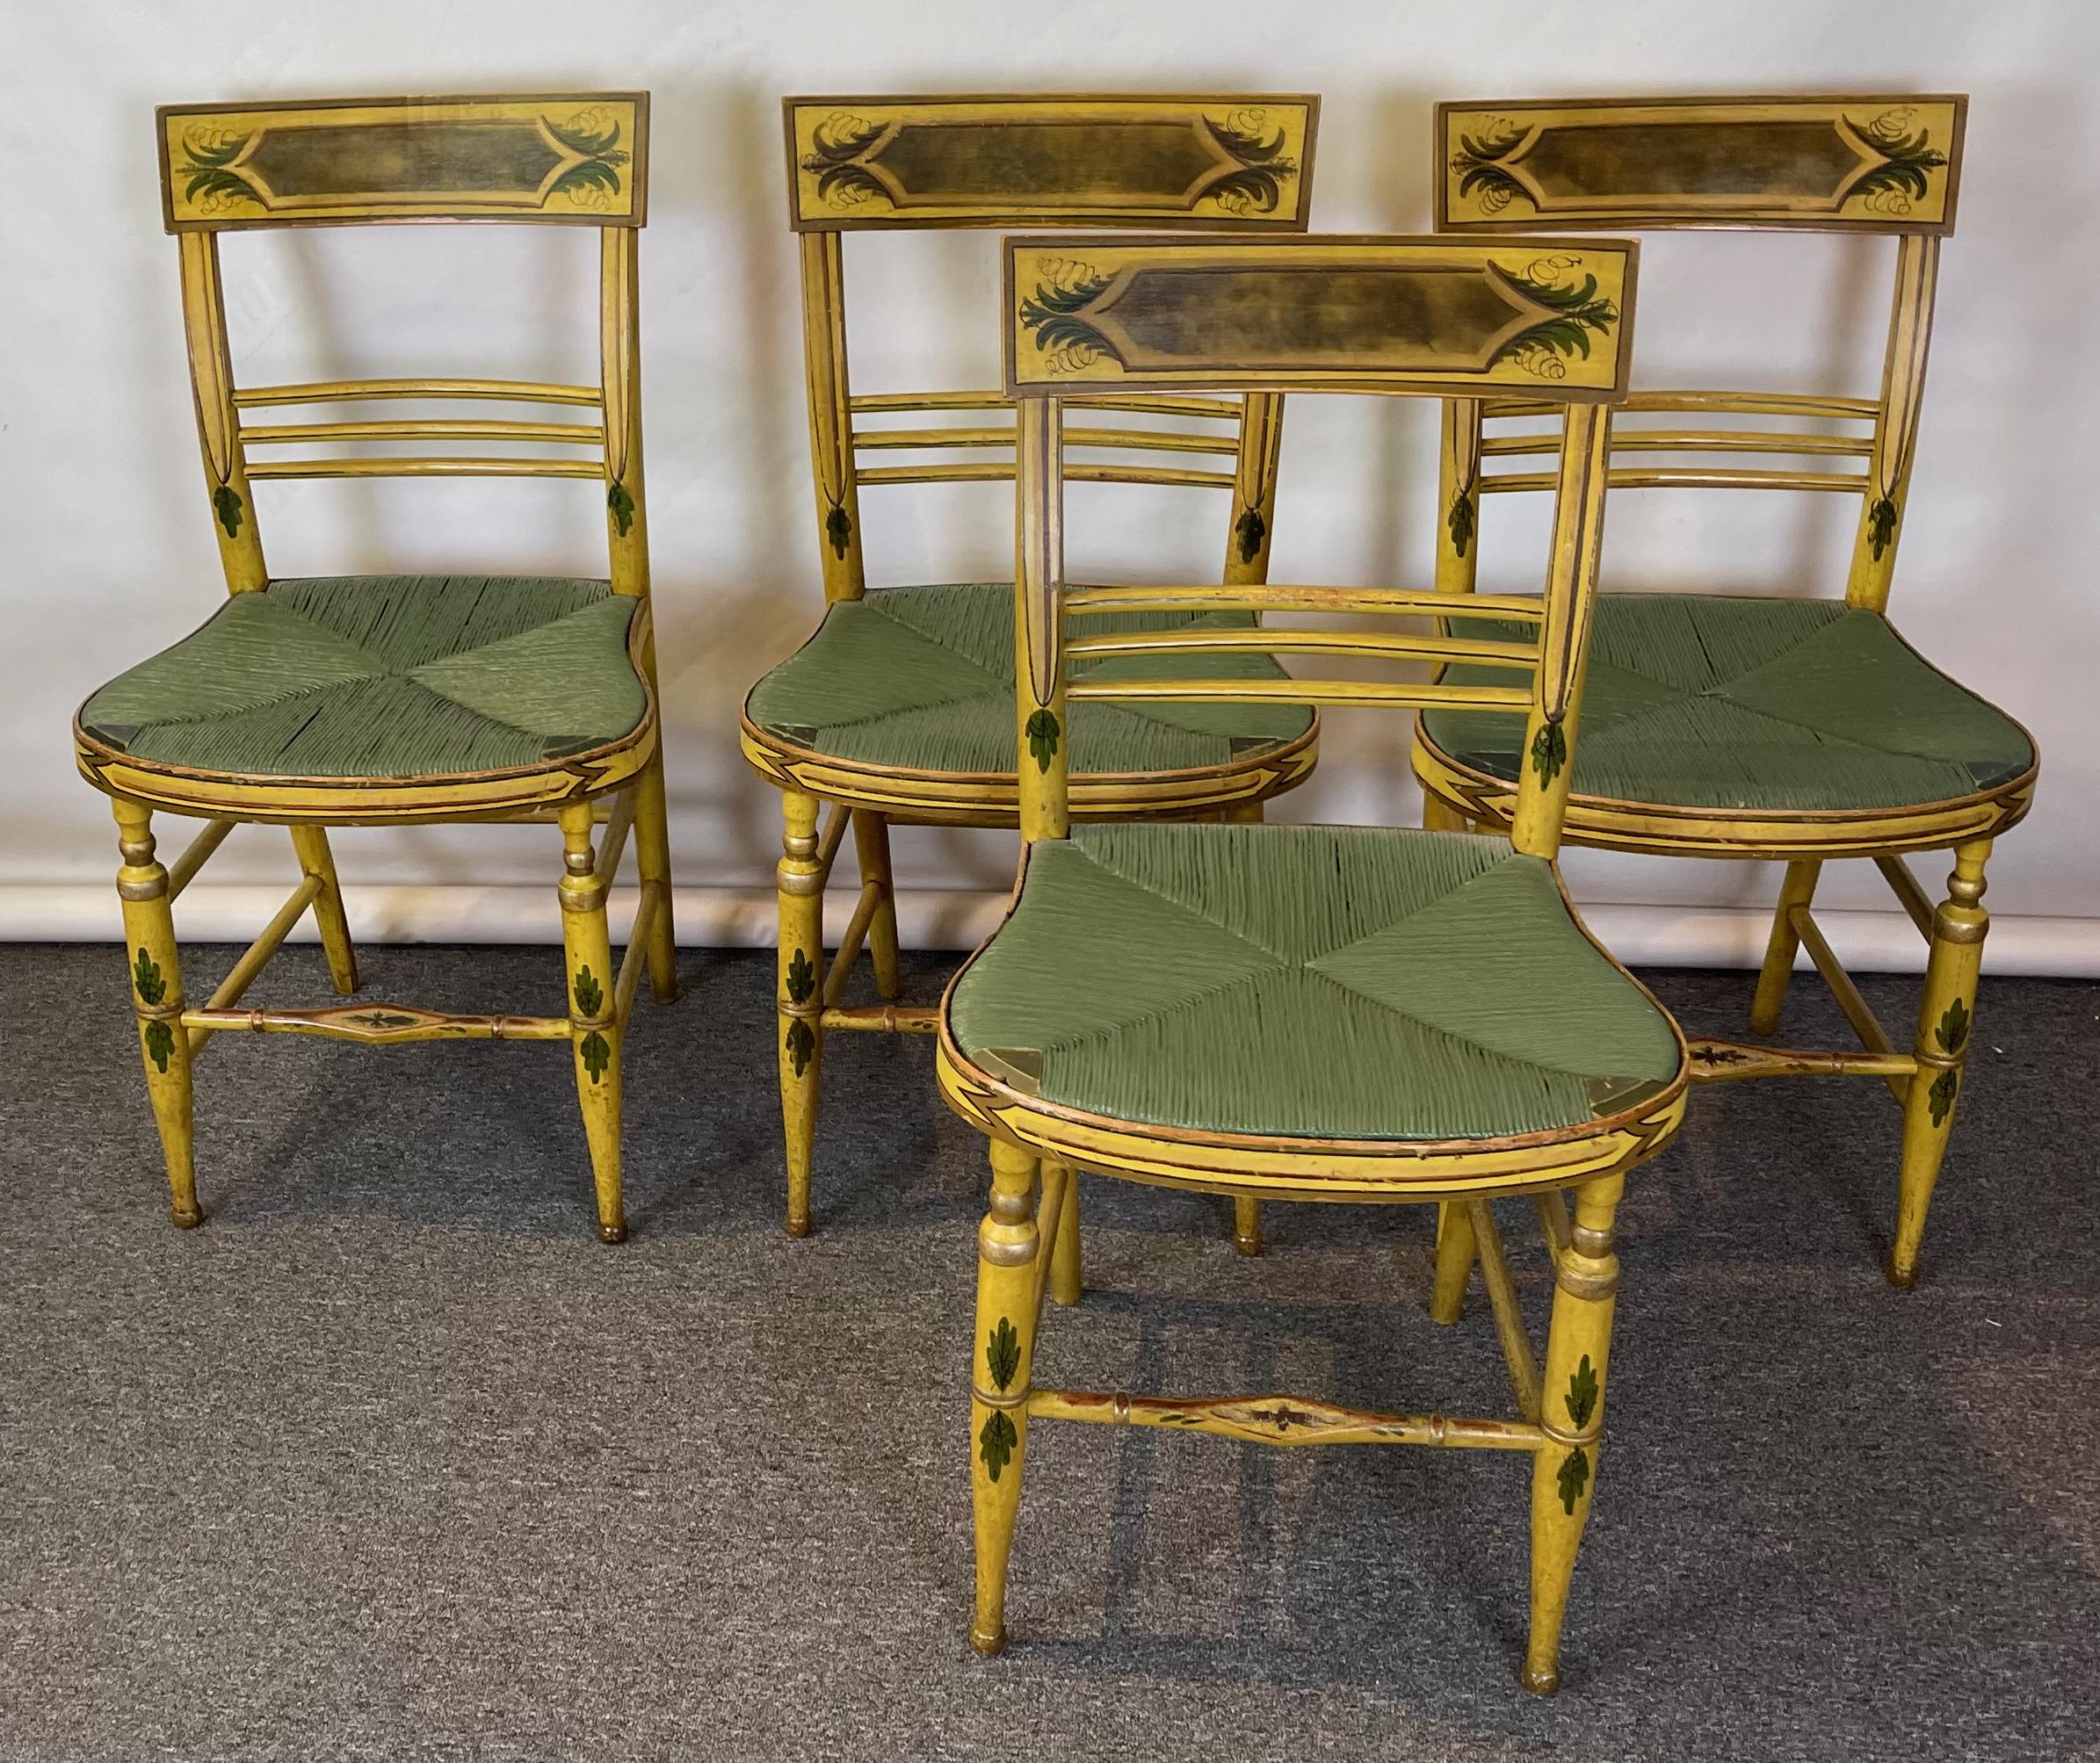 Set of Four Early 19th Century American Paint Decorated Fancy Chairs 1